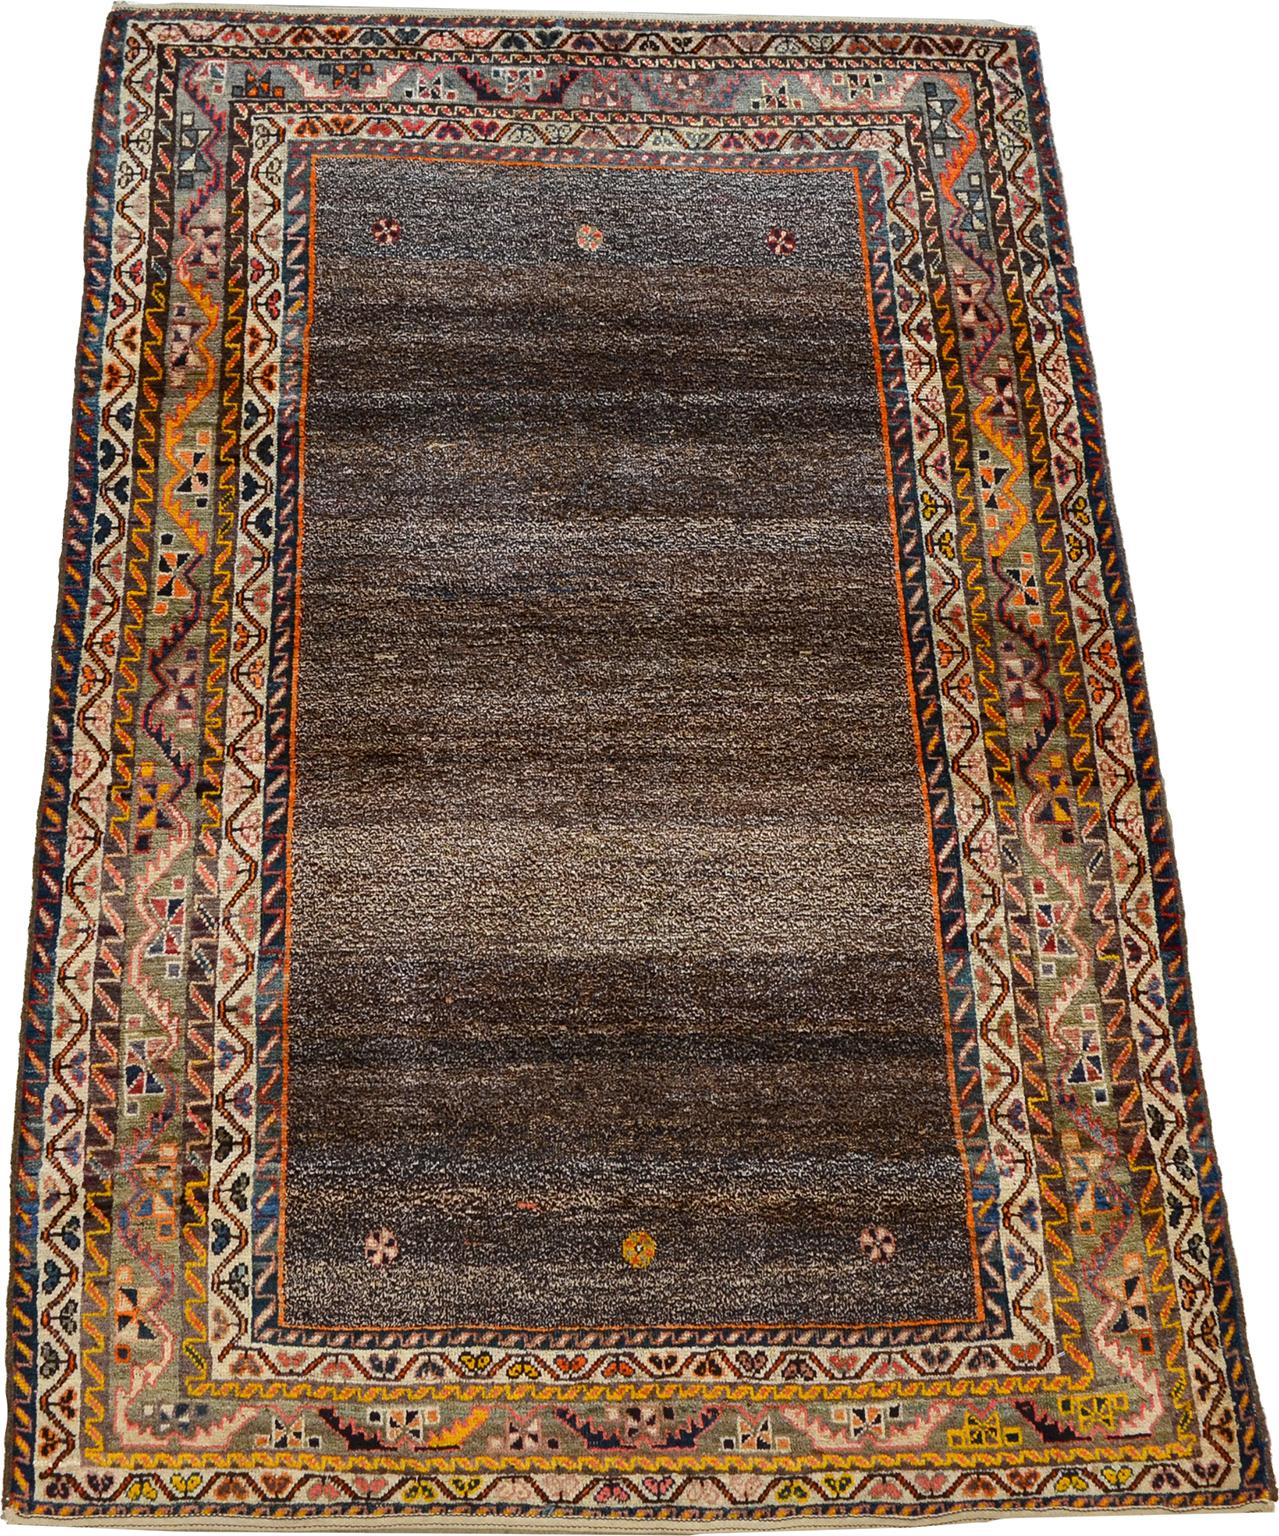 Antique 1910s Wool Persian Loristan Gabbeh Rug, 5' x 7' In Excellent Condition For Sale In New York, NY